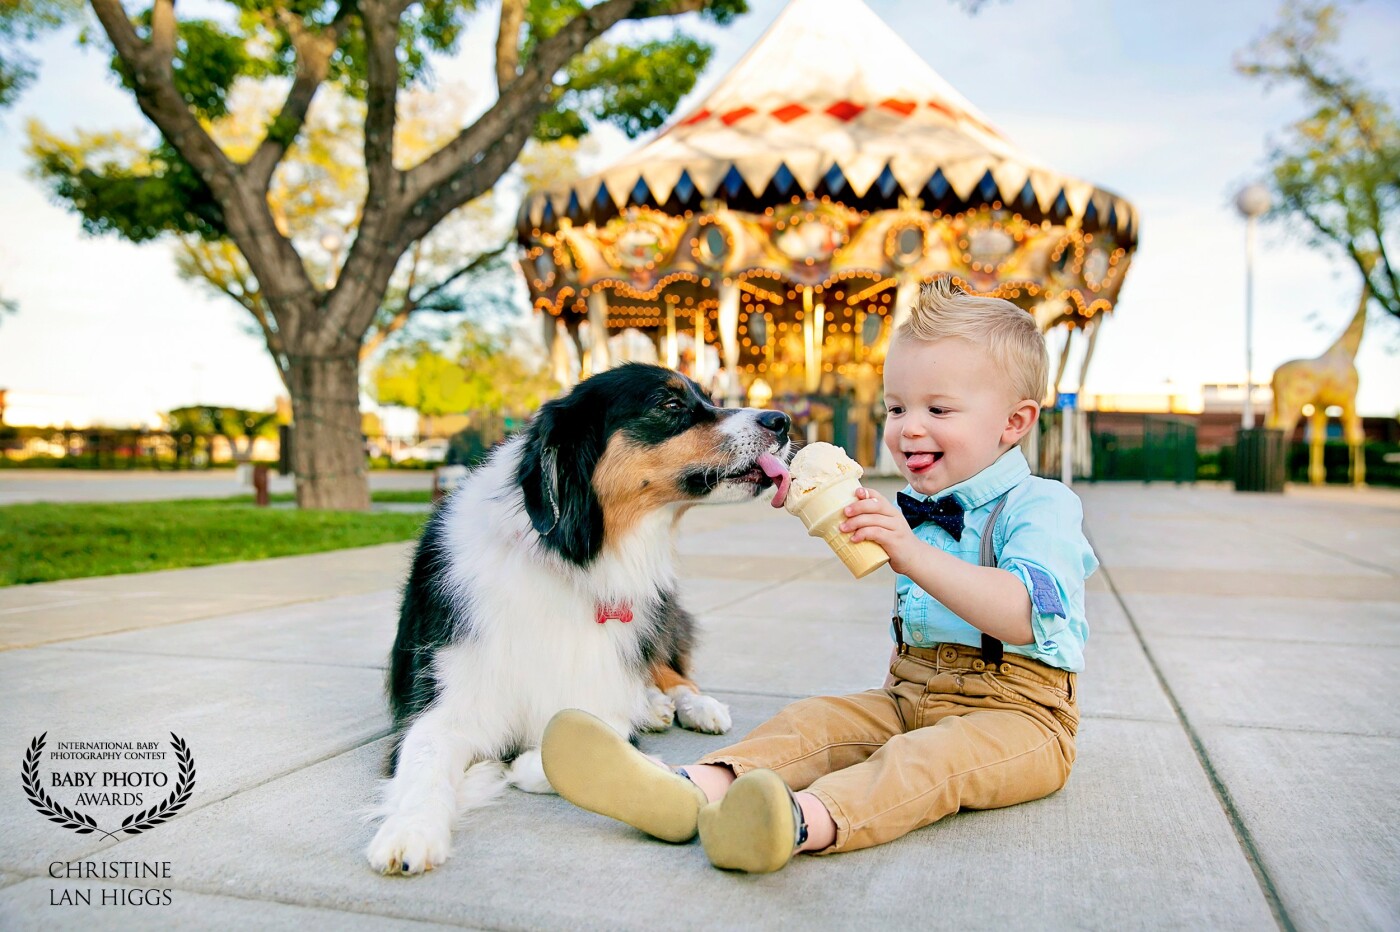 Sharing an ice cream on a warm day with your best friend is the best! This was photographed at the Nut Tree,  which opened in 1921 as a modest roadside stop in Vacaville, CA, eventually growing to become a world-famous road stop with a restaurant, toy store, and railroad connecting to the Nut Tree Airport. Over 100 years later, it is still a fun place for families to make memories such as this one of Logan (age 2) and Eli (cute dog).